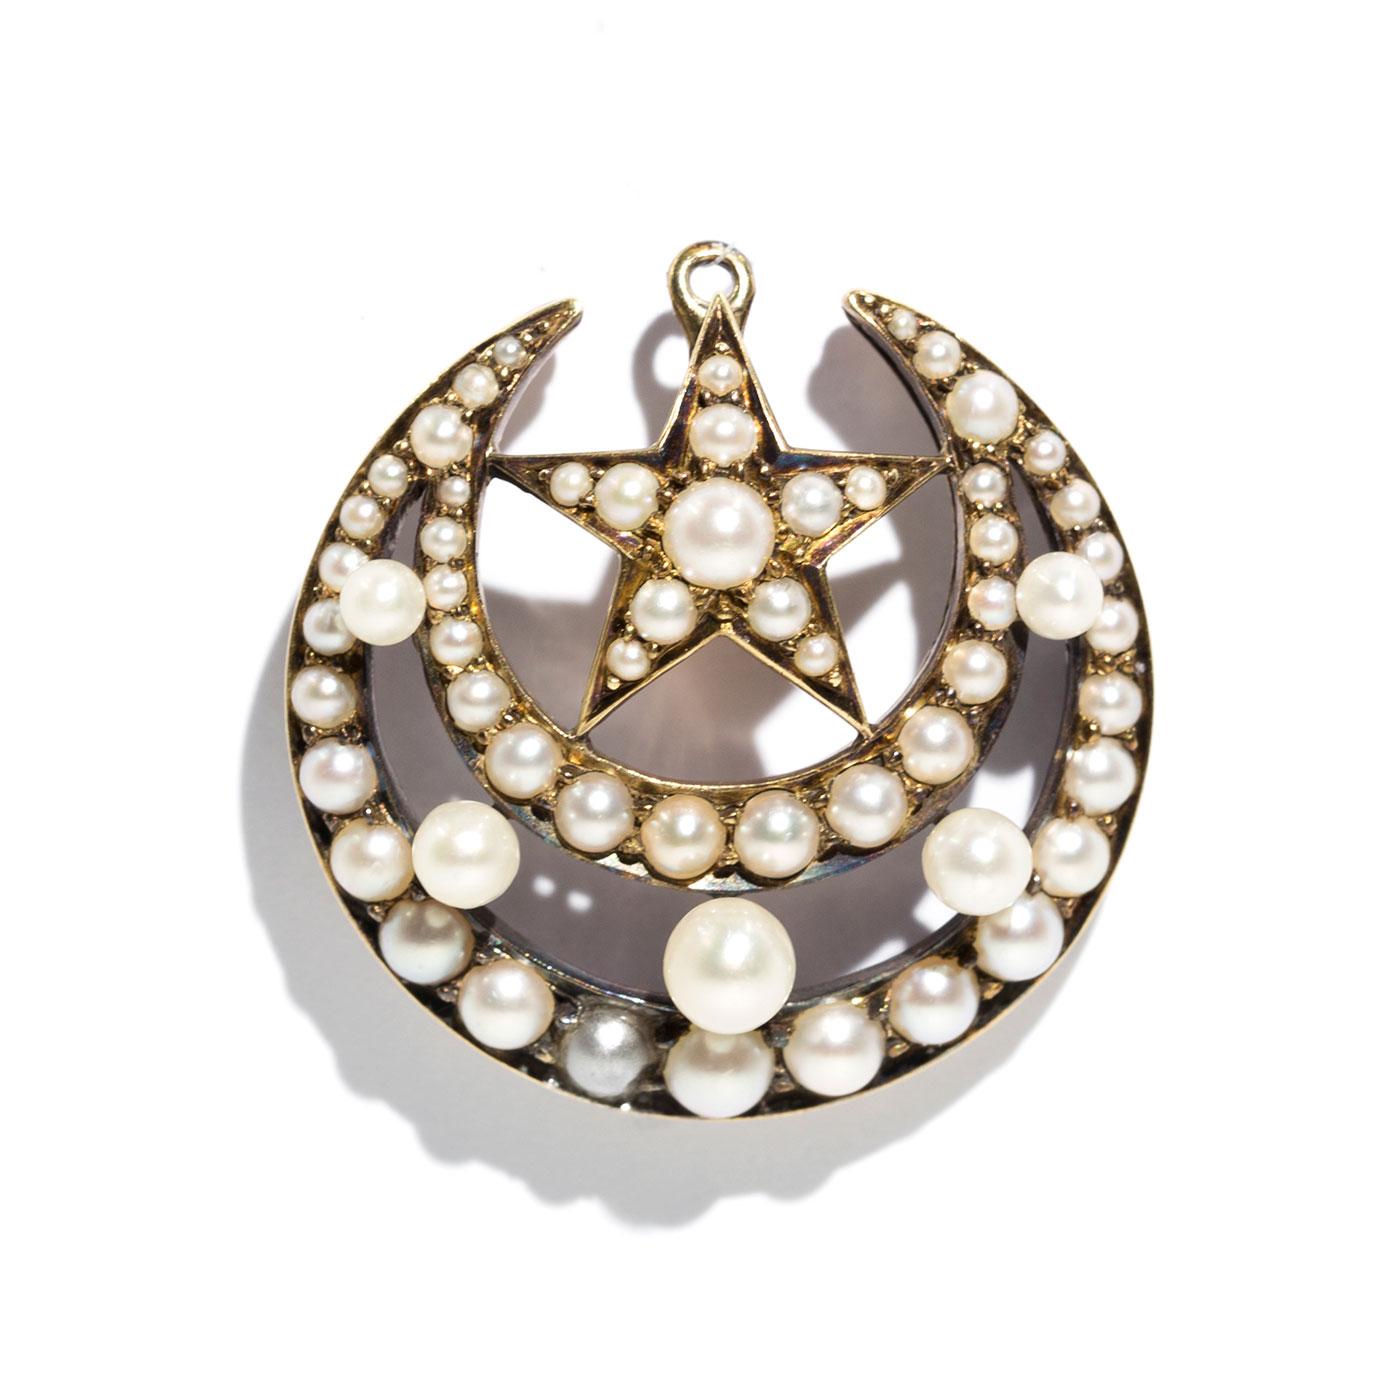 Carefully crafted in 15 carat yellow gold, this antique 19th century Victorian Star and Moon brooch. This charming antique brooch features five round white cultured pearls that are carefully set in the middle of the crescent moon, perched on top is